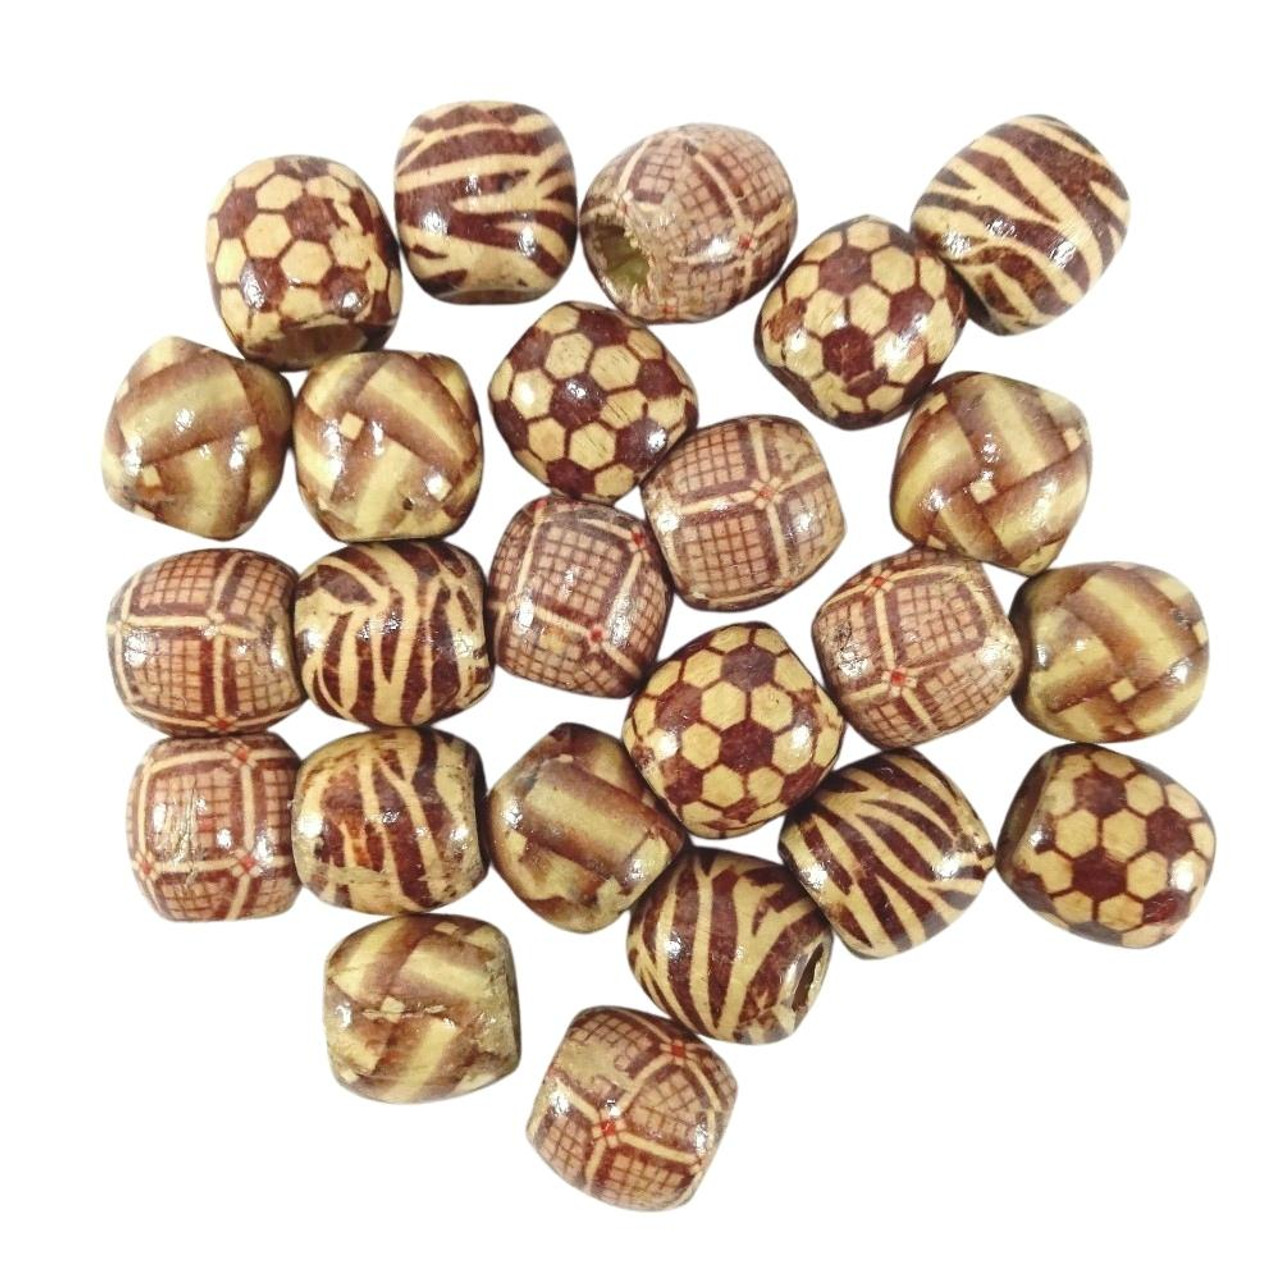 12mm Wooden Patterned Hair Beads, Brown/Beige at I Kick Shins